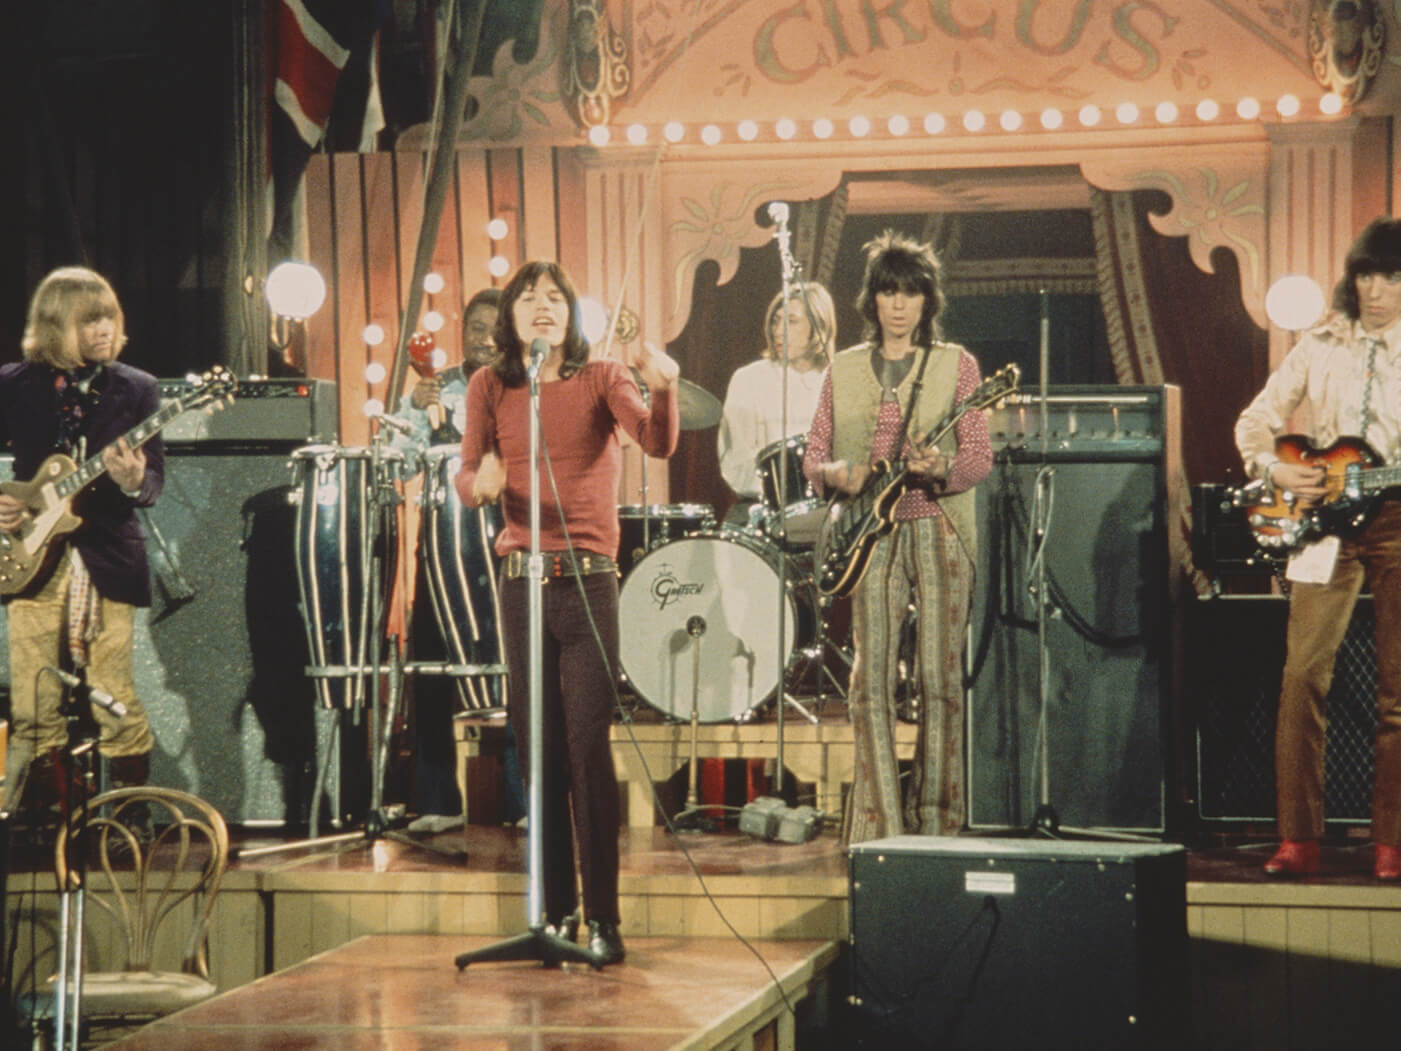 The Rolling Stones Rock And Roll Circus concert